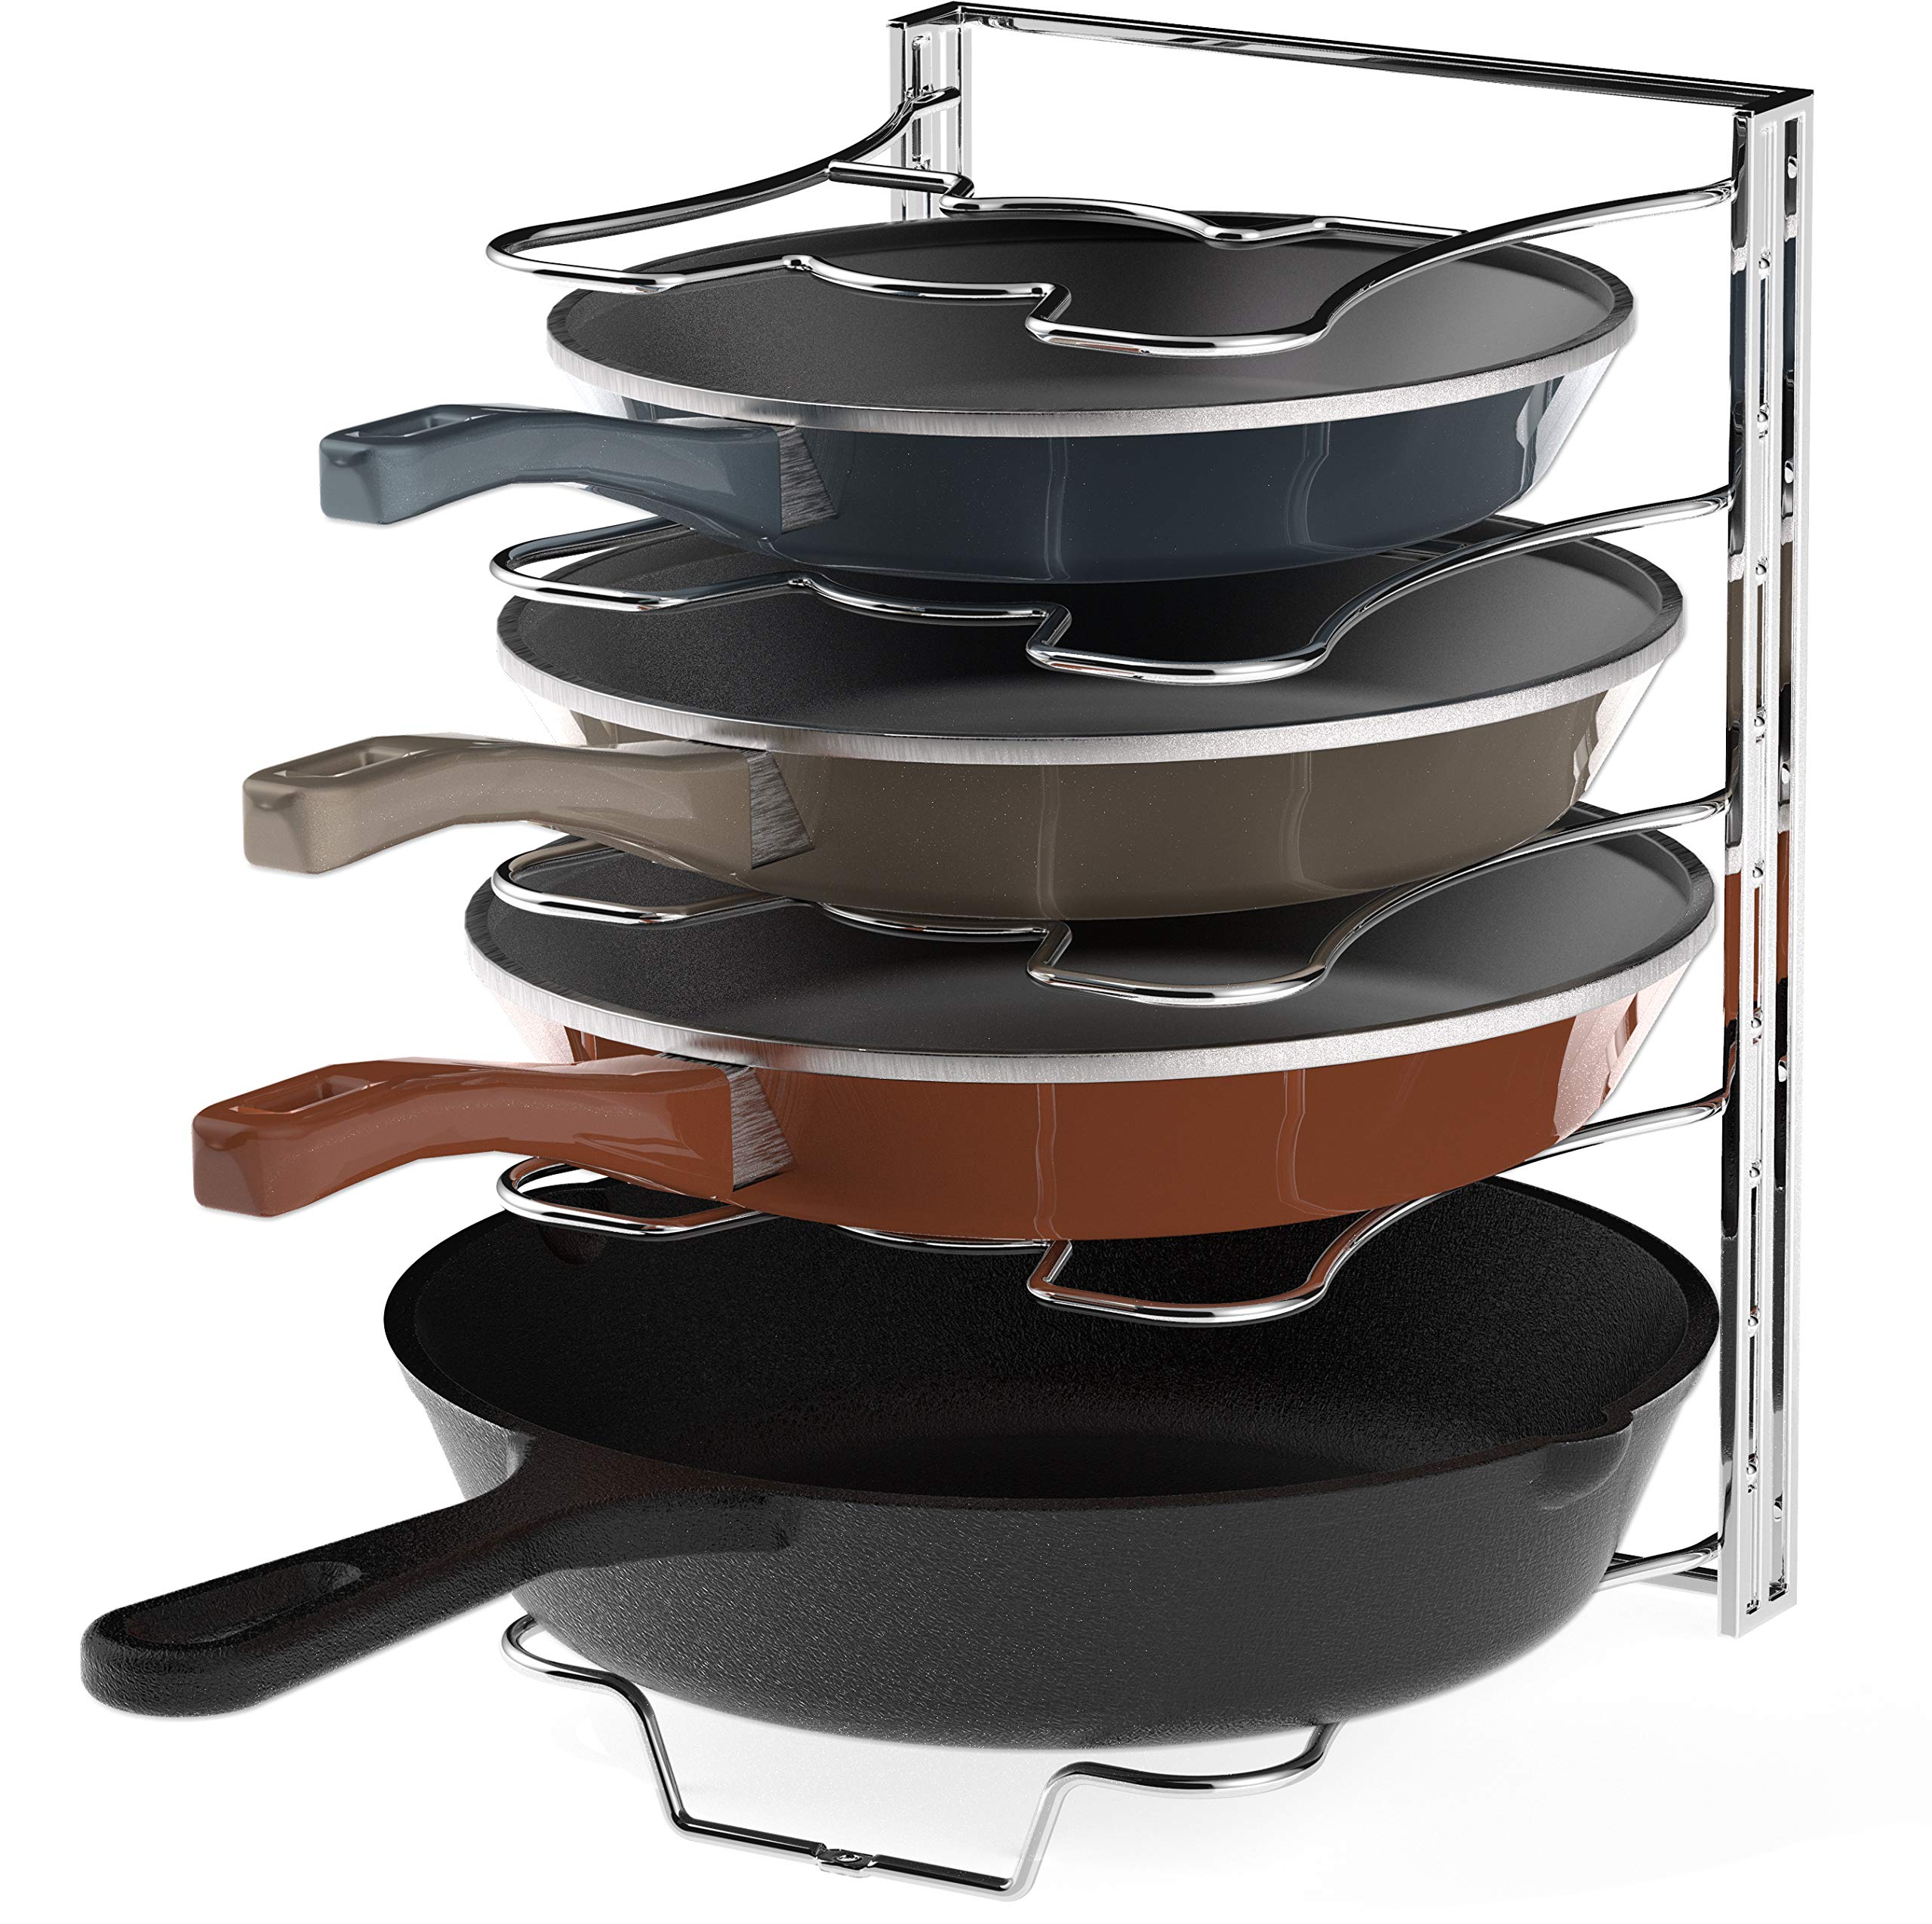 Easy Houseware Kitchen Cupboard 5 Adjustable Compartments Pan and Pot Lid Organizer Rack Holder, Chrome